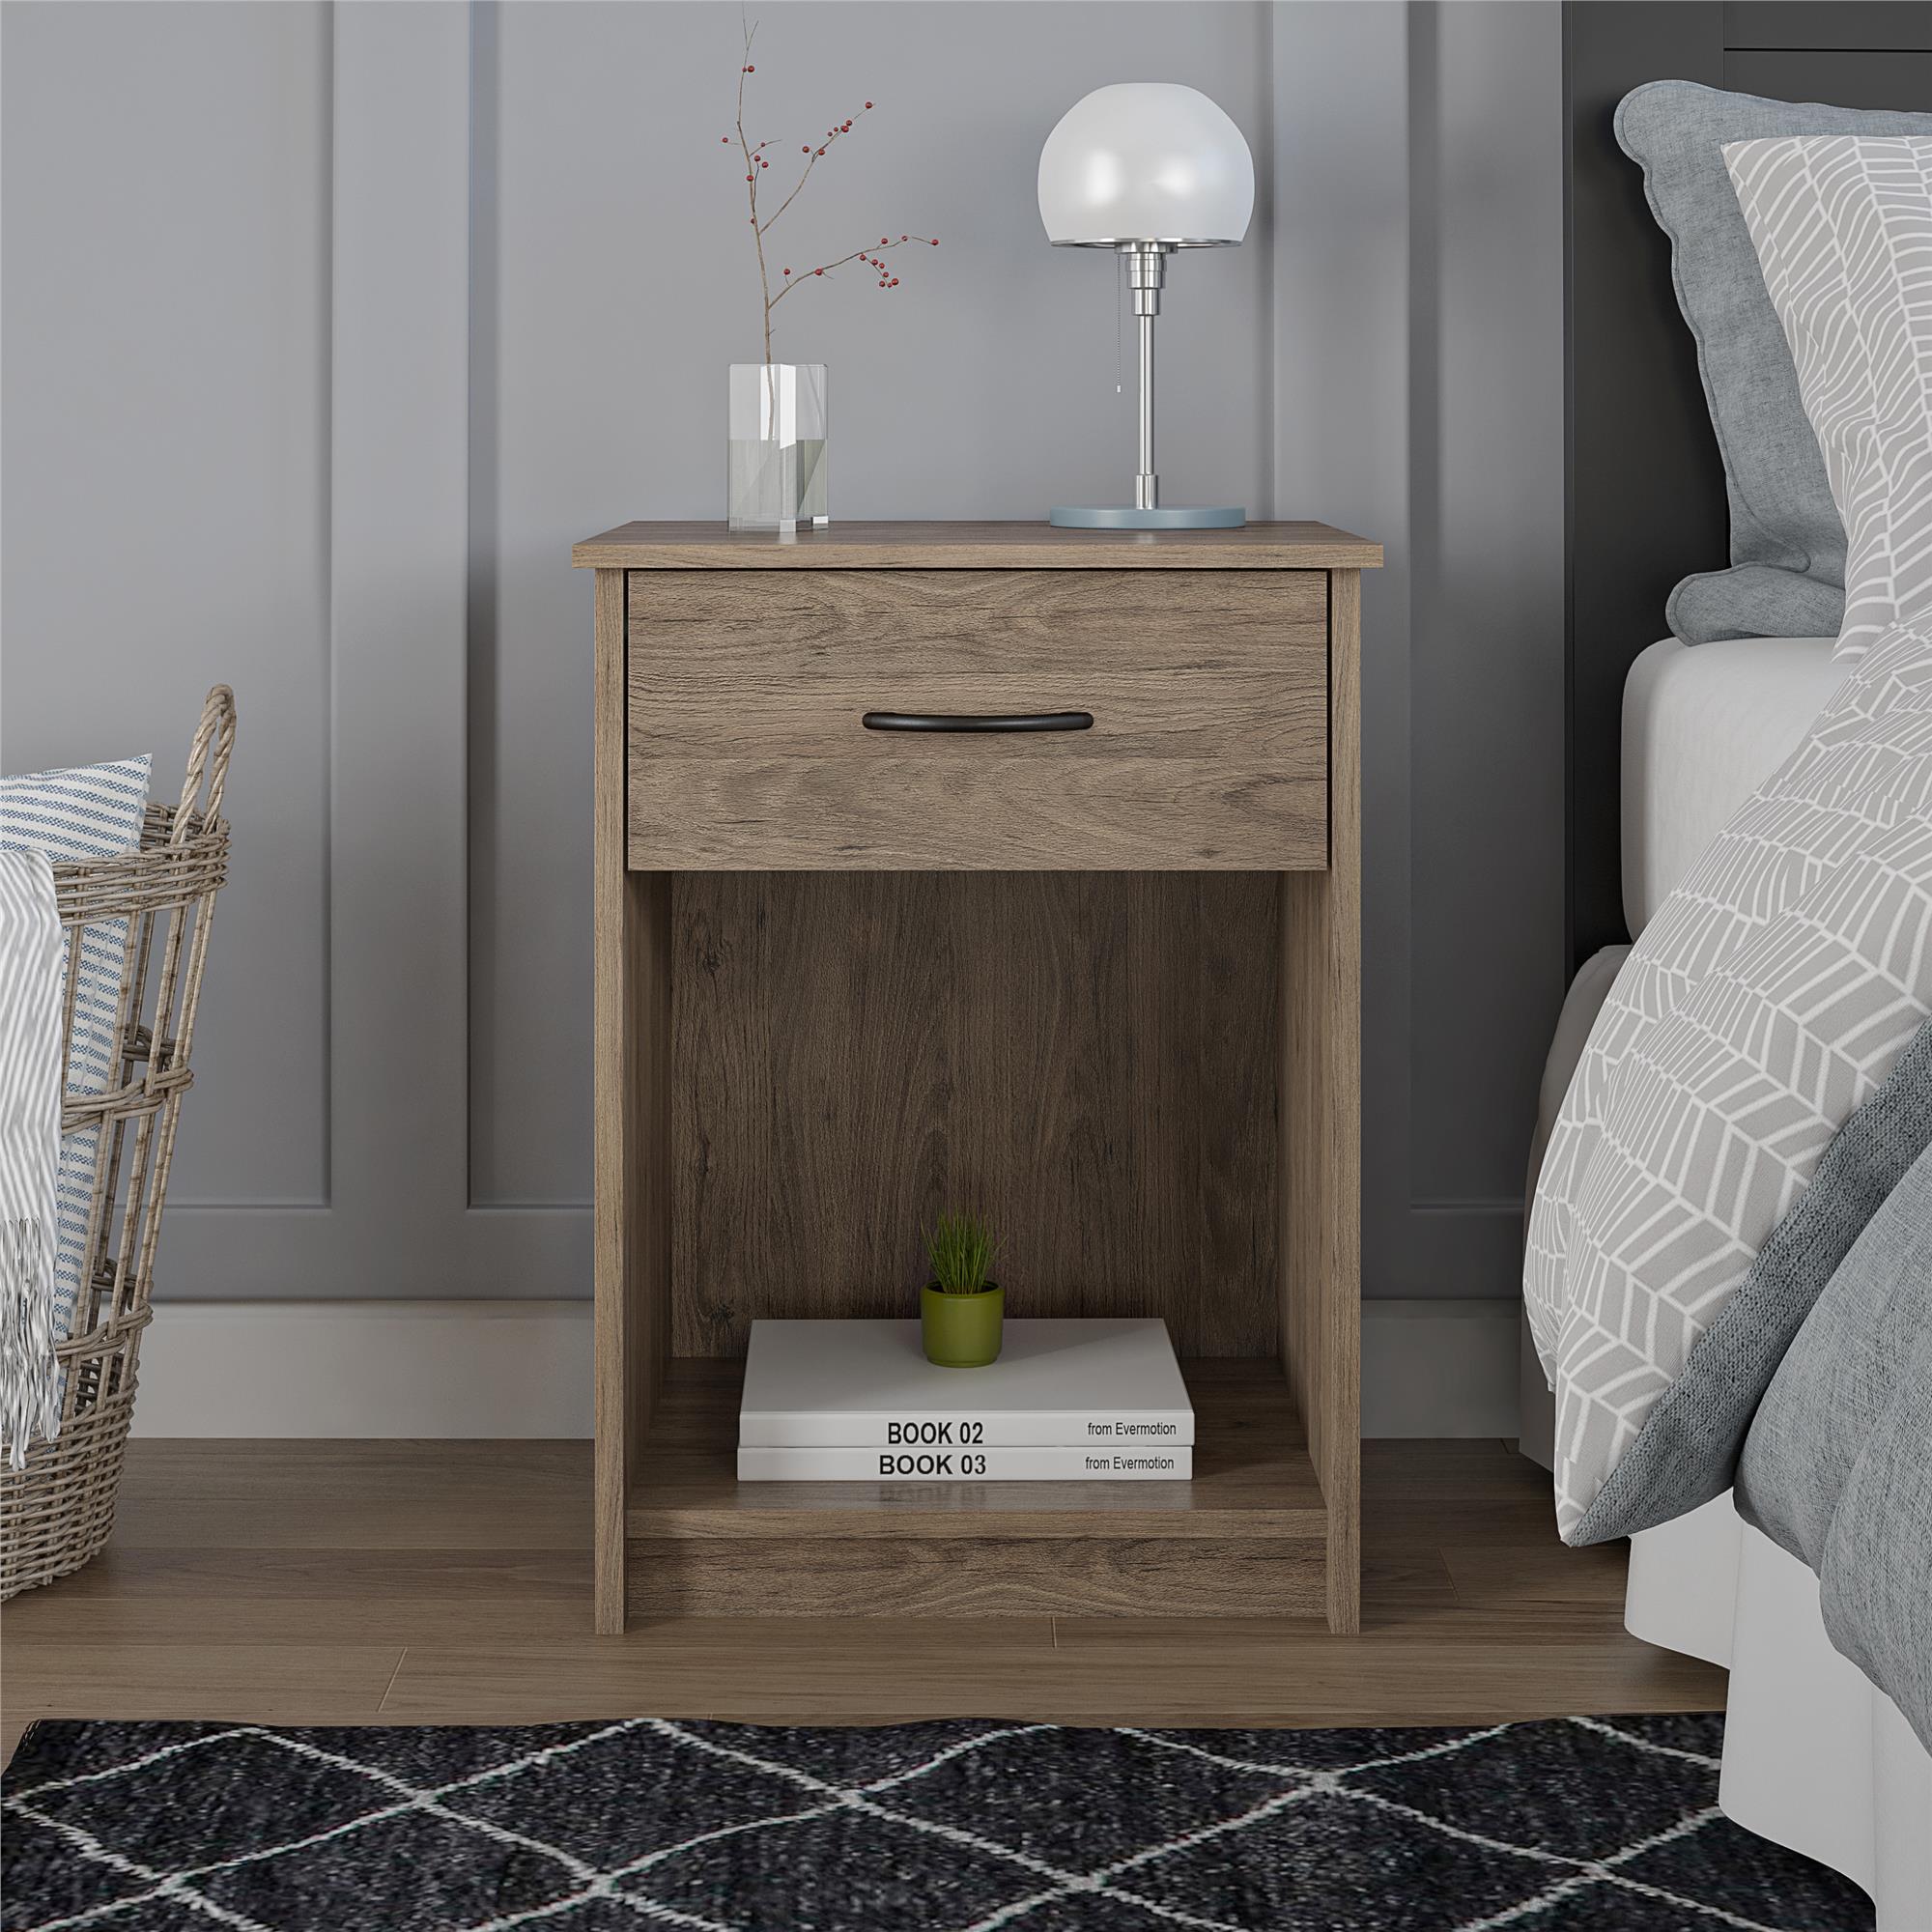 Mainstays Classic Nightstand with Drawer, Rustic Oak - image 11 of 13